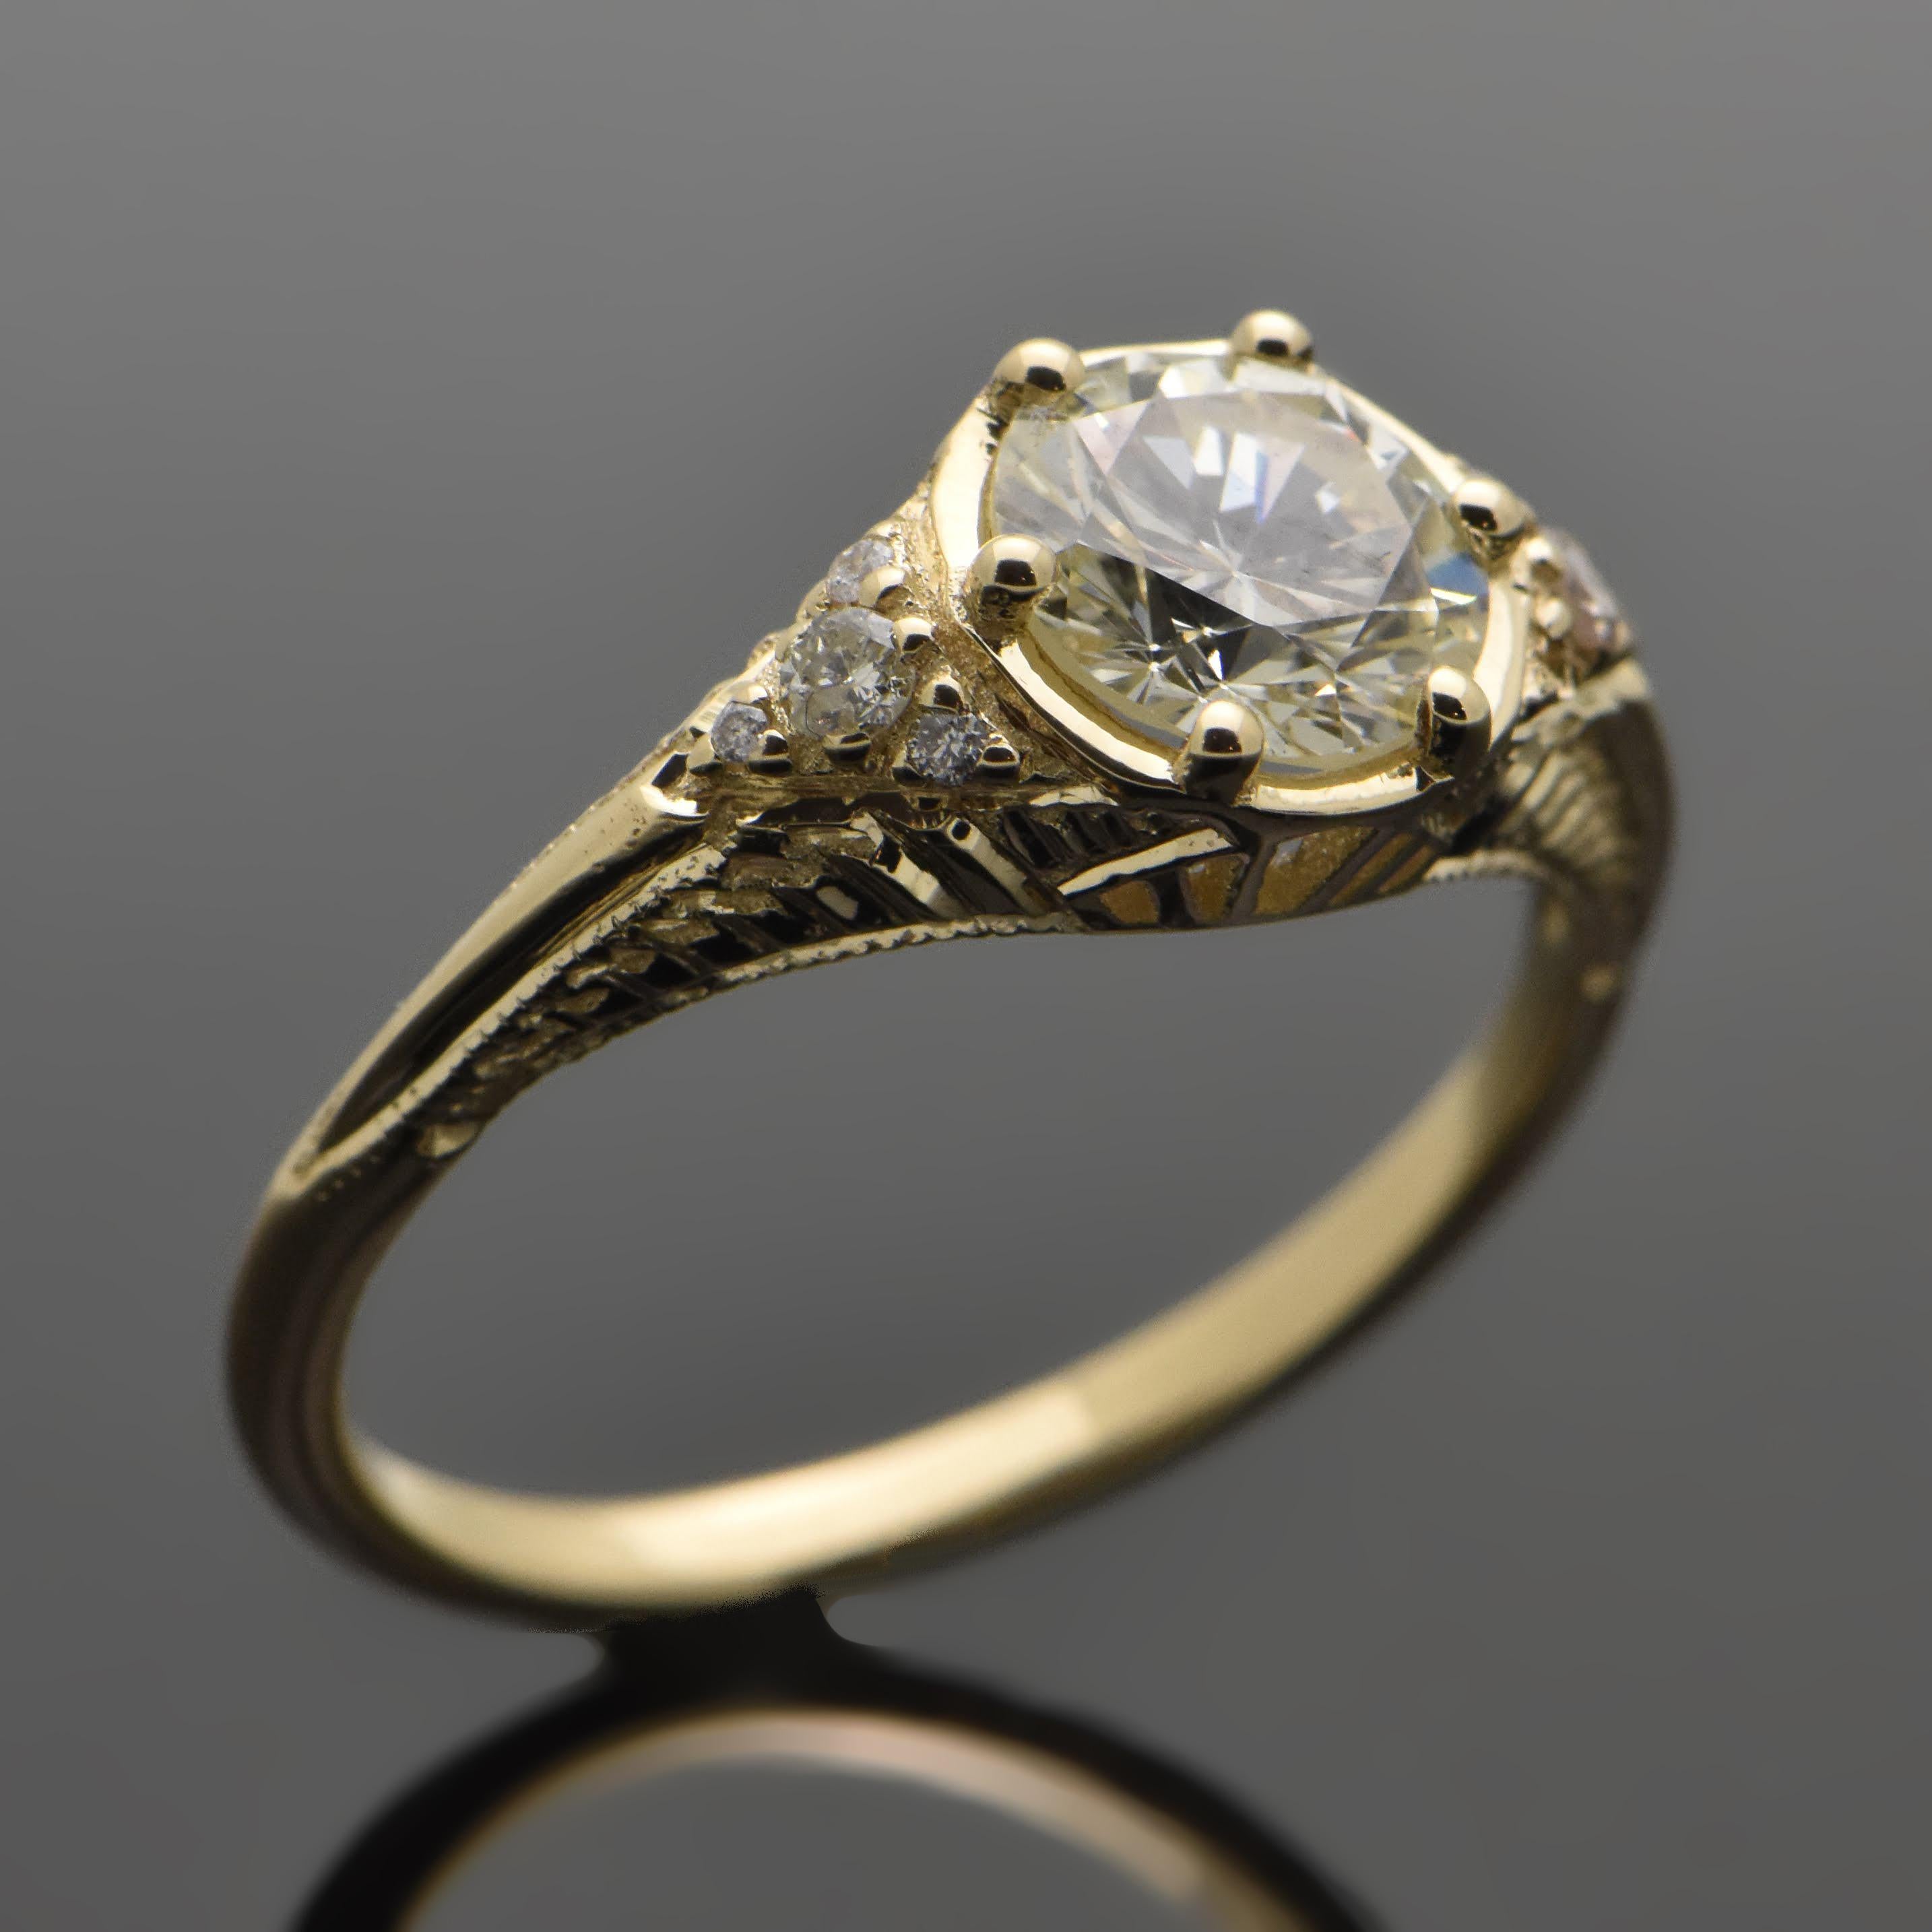 14kt Yellow Gold Diamond Ring. This ring features a round brilliant cut diamond set with 6 prongs, diamond accents on shoulders, and a carved band design. 

This item is a custom order only. Price is for the ring setting only. The stones will be